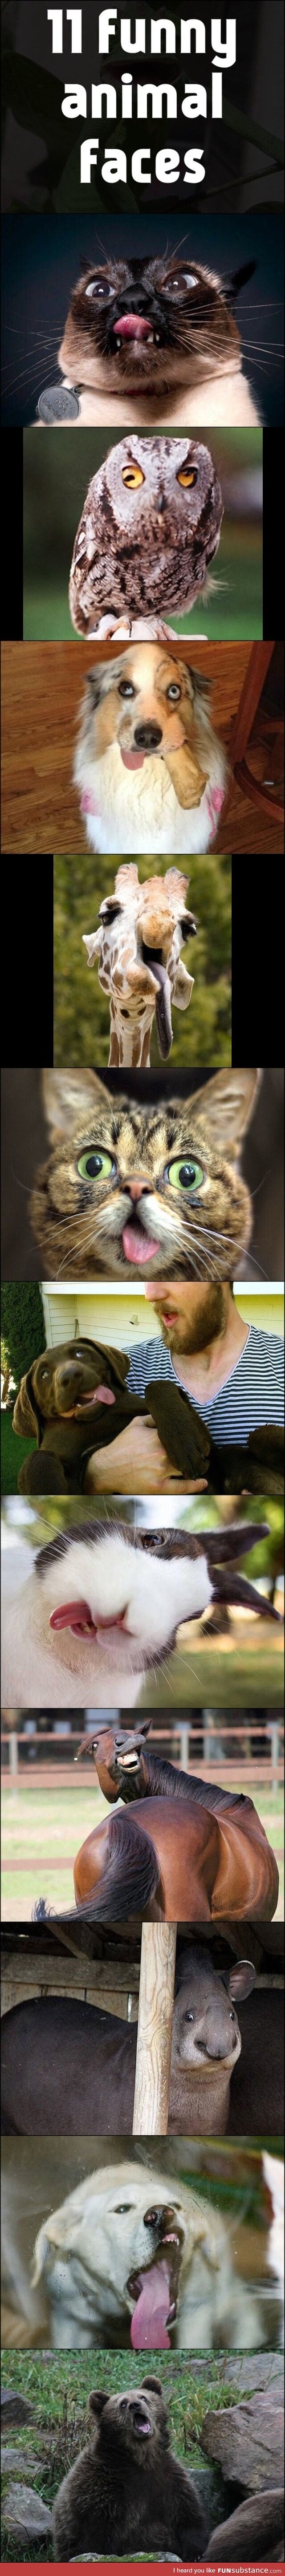 Funny animal faces